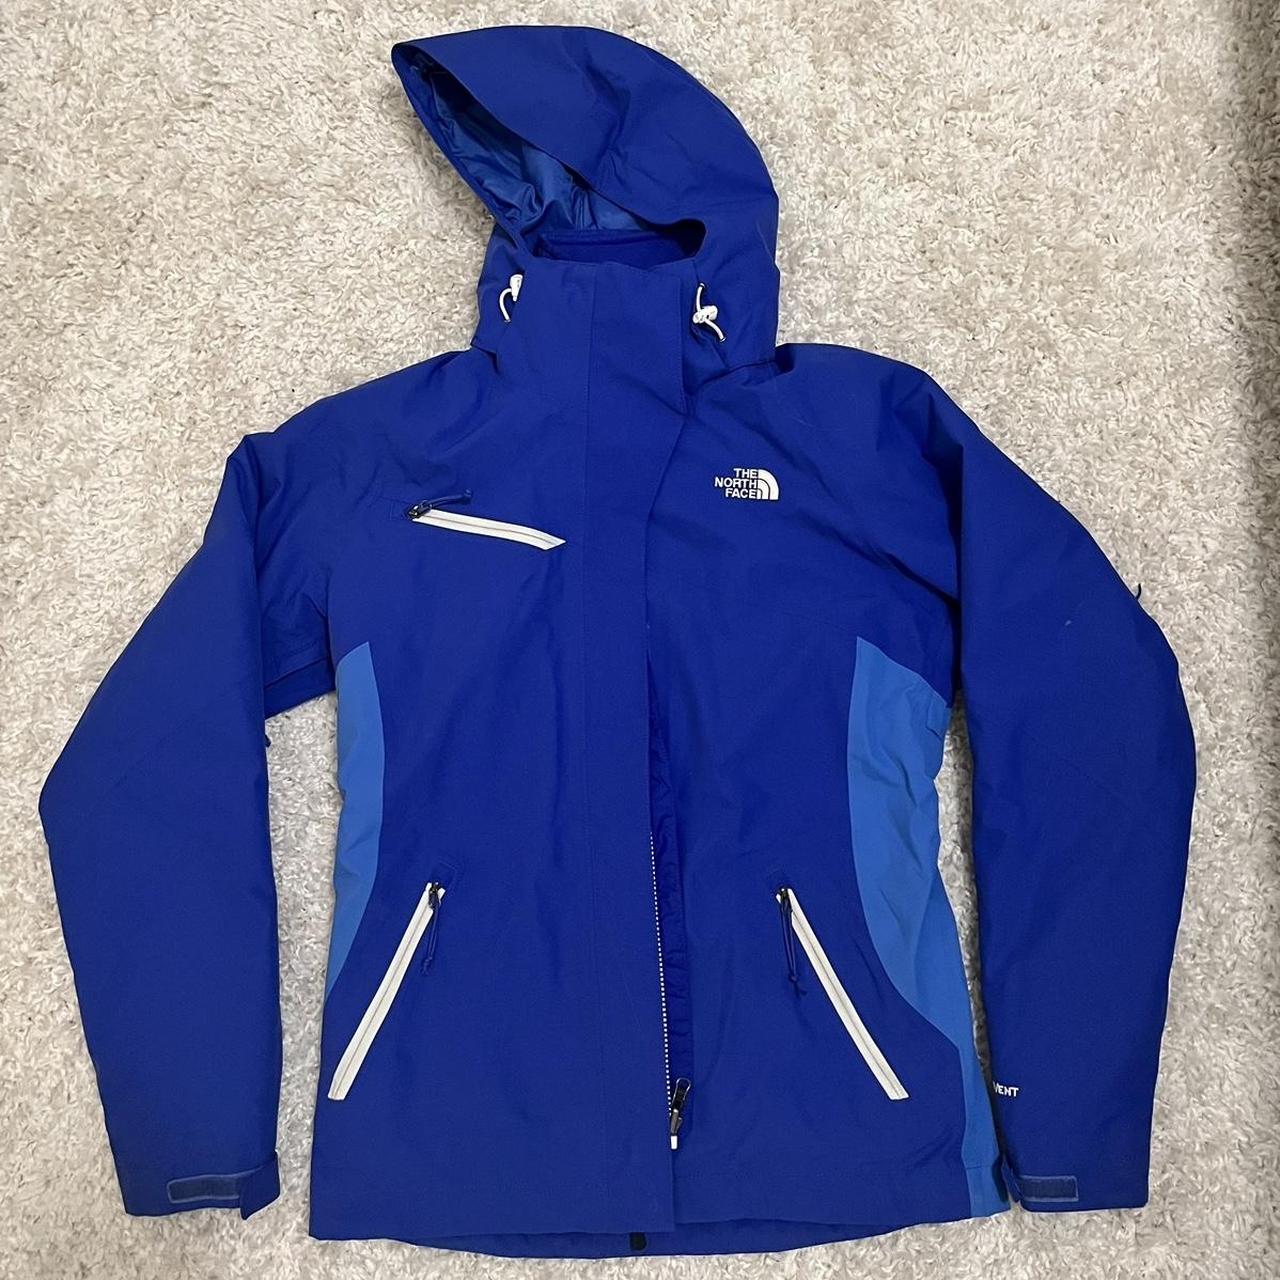 The North Face Women's Blue Coat